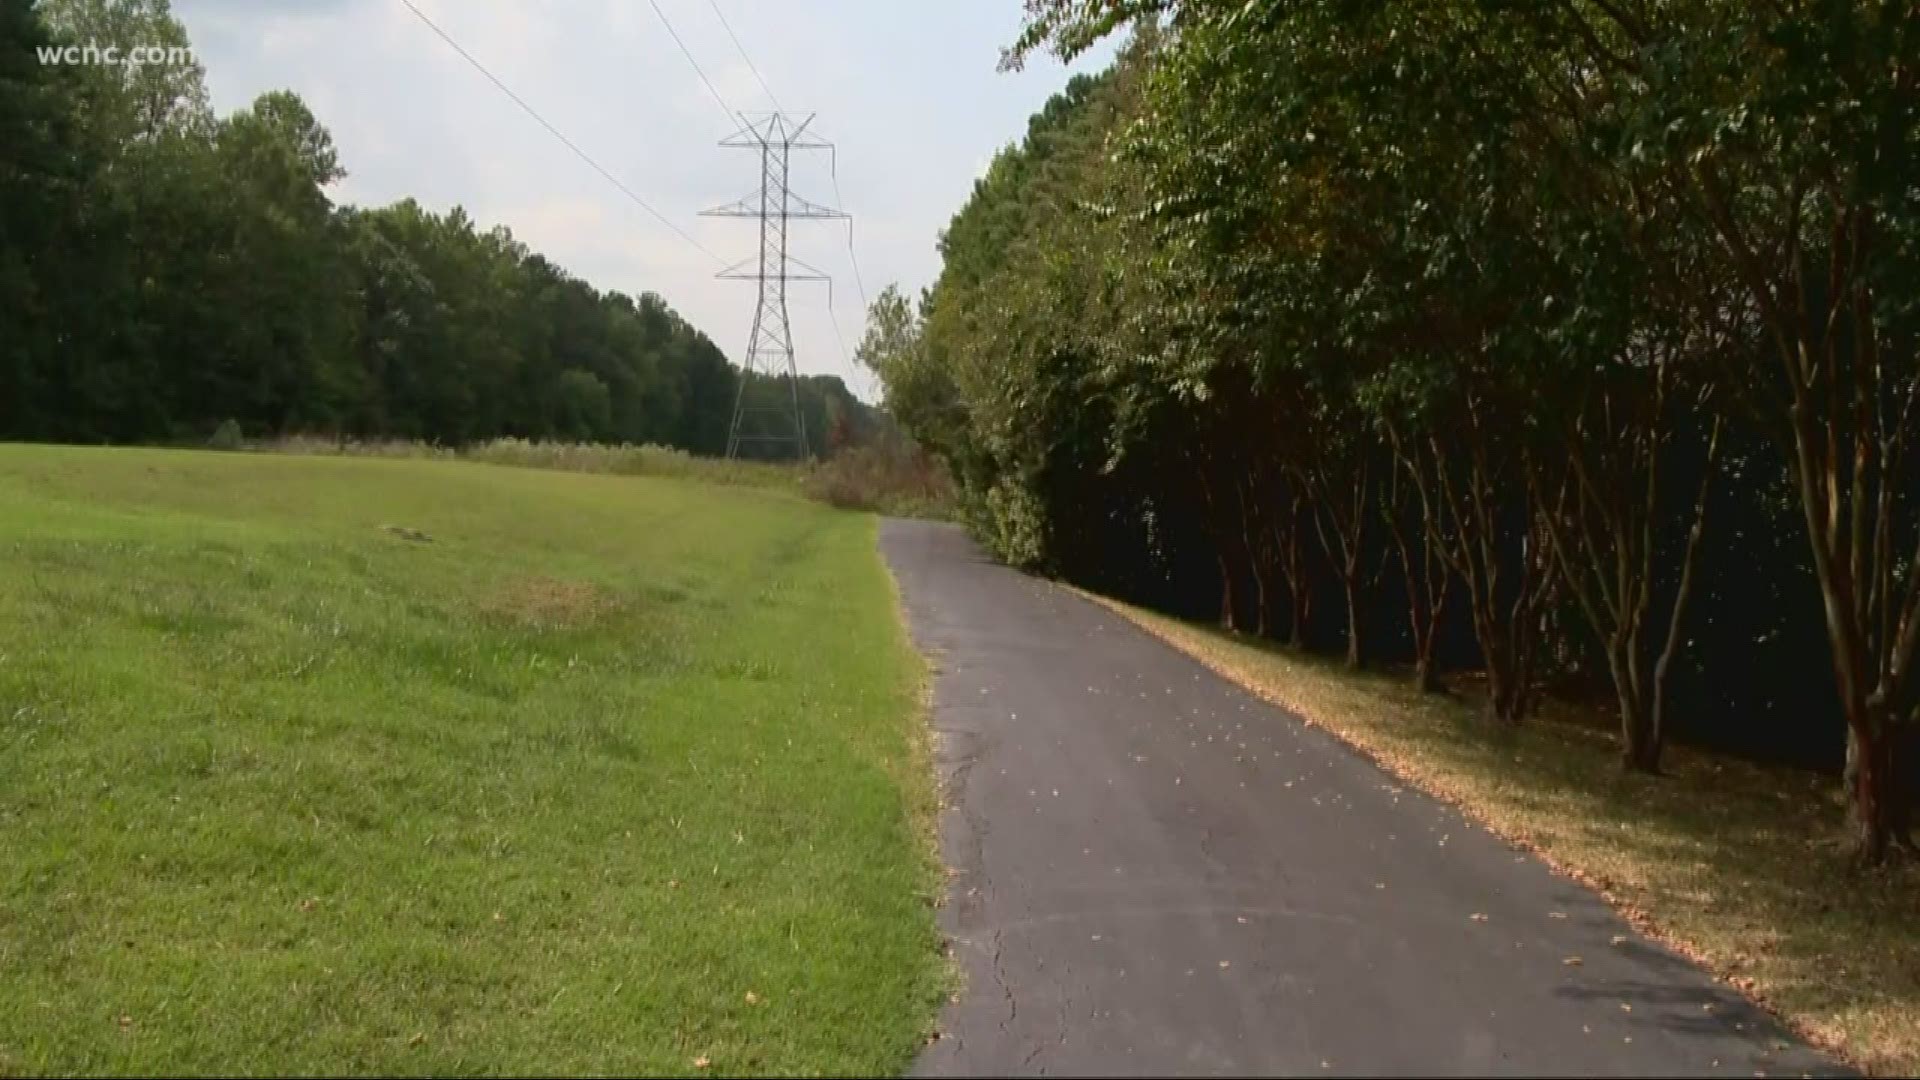 The victim told deputies he was jogging along the trail when a man approached him from behind and stabbed him in the upper back.